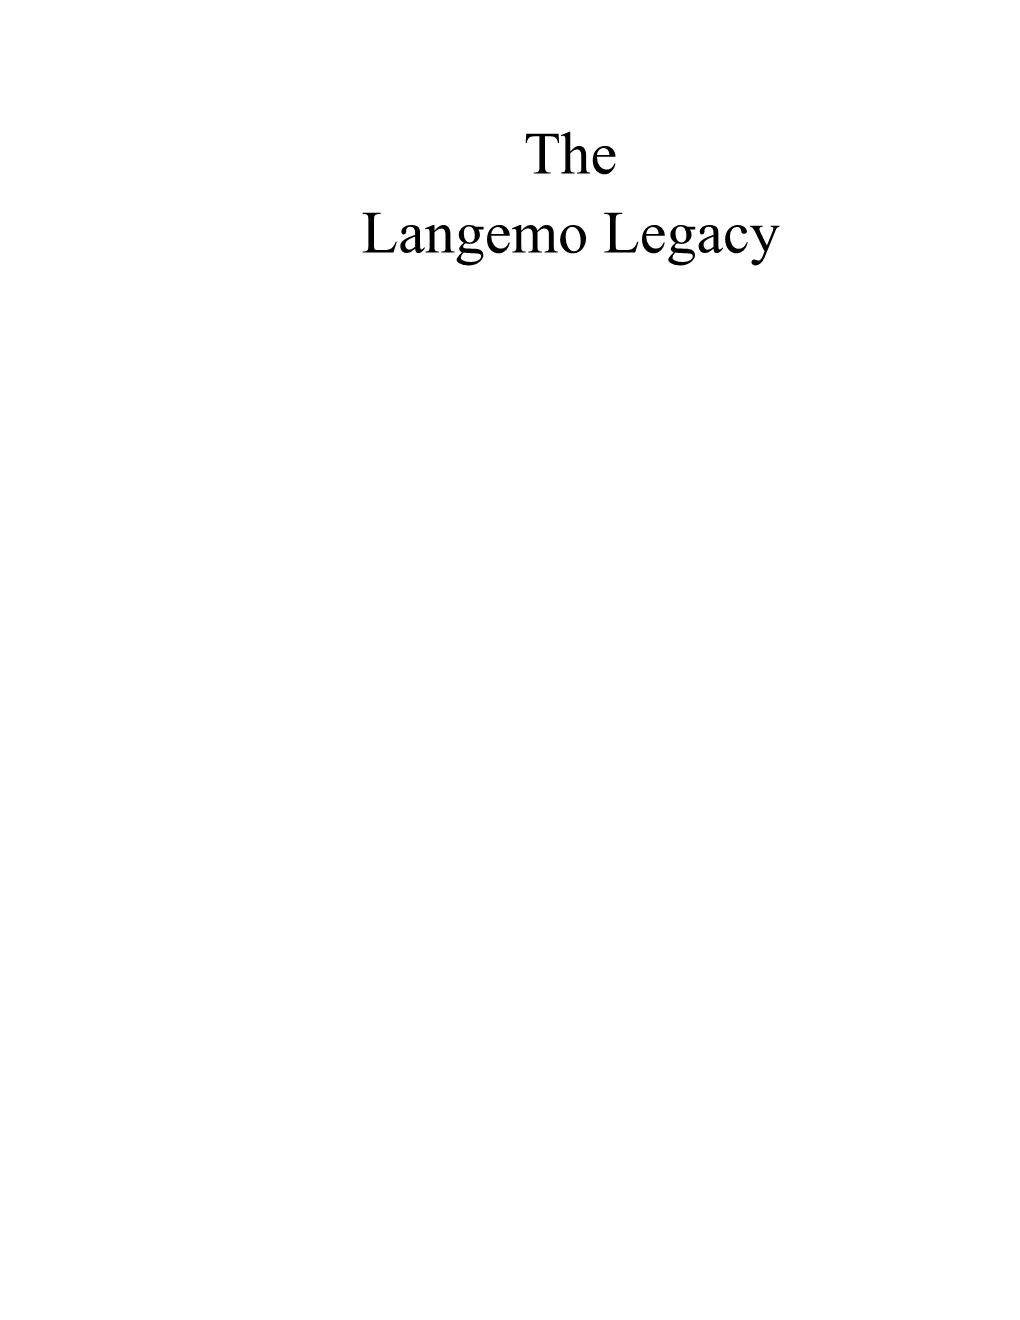 The Inspiration to Write ”The Langemo Legacy” Came About Through the Encouragement of Cousins and Other Members of the Family